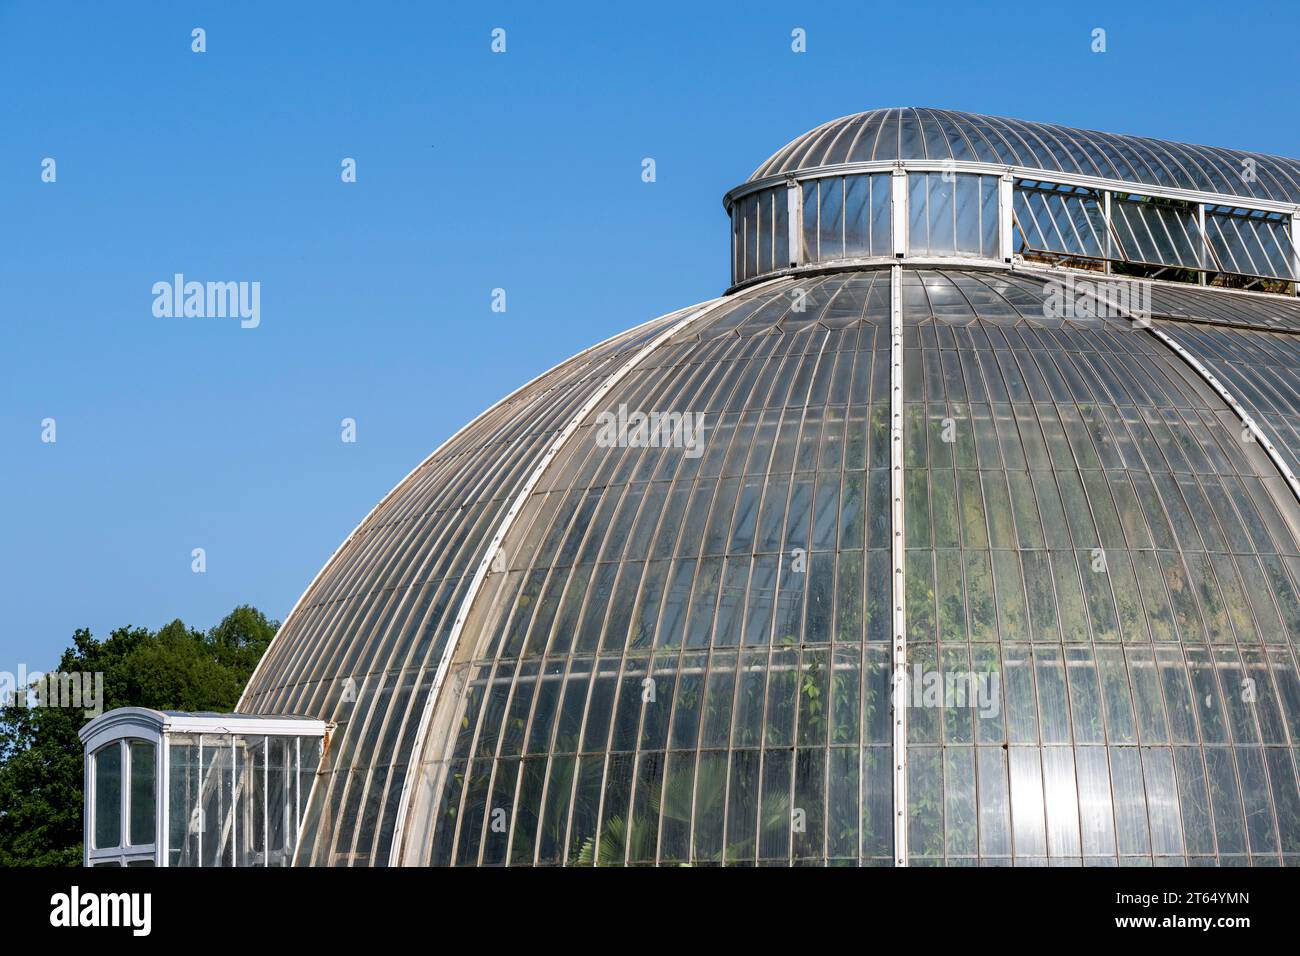 Roof construction, Palm House, oldest Victorian greenhouse in the world, Royal Botanic Gardens, Kew, London, England, Great Britain Stock Photo